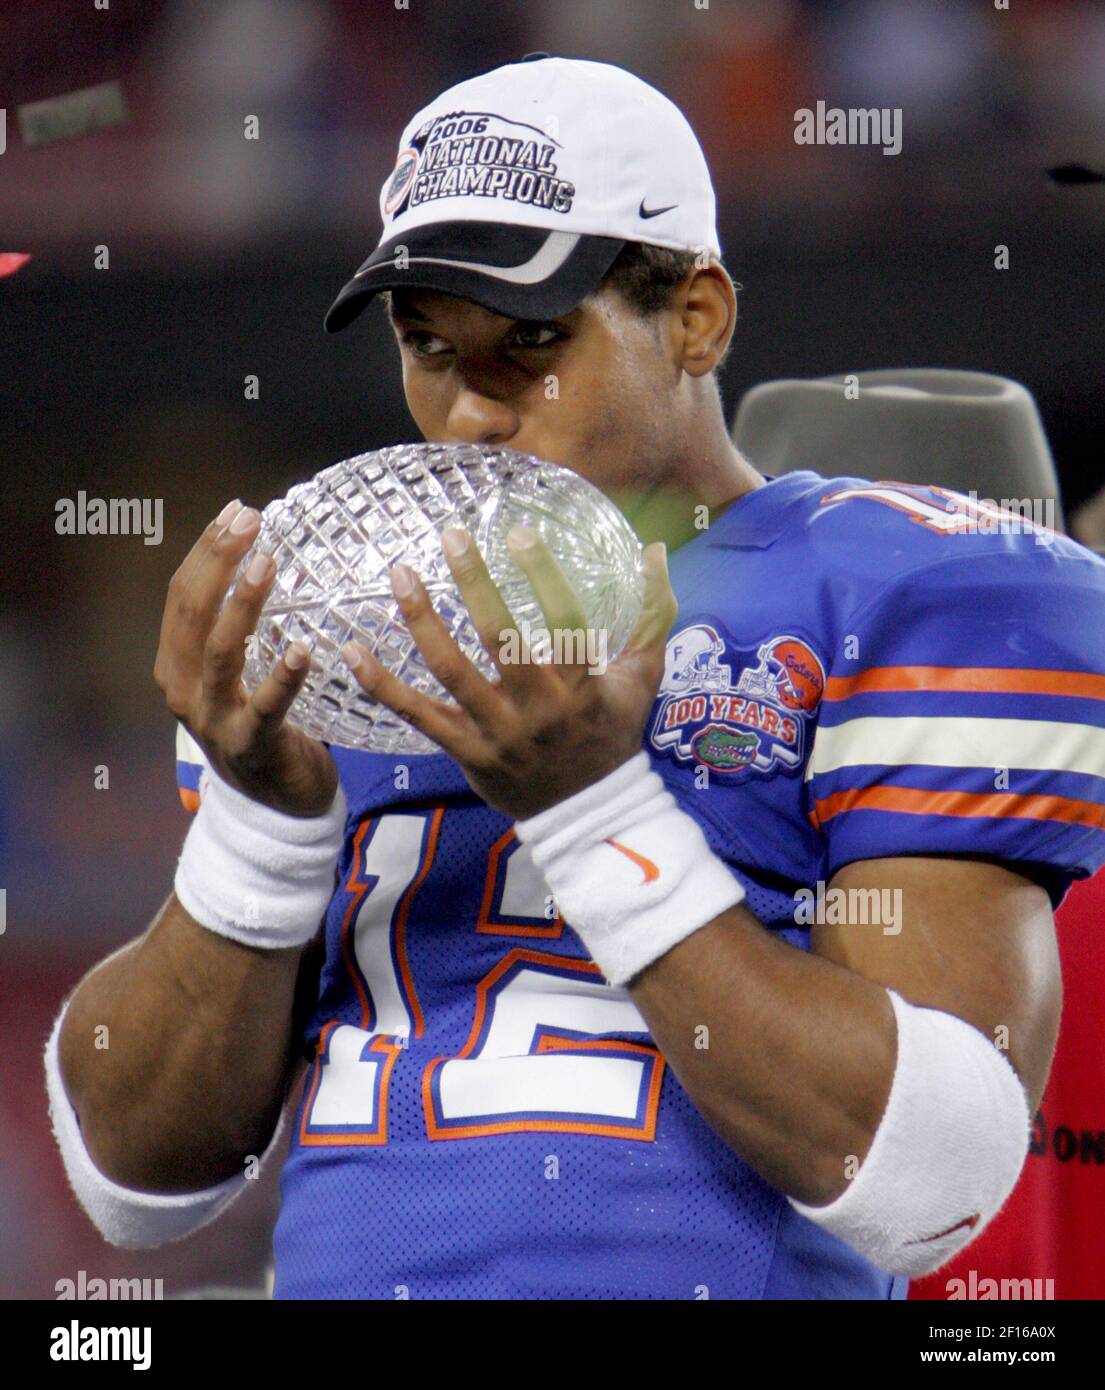 Florida quarterback Chris Leak kisses the BCS trophy after the Gators'  41-14 victory over Ohio State in the BCS national championship game in  Glendale, Arizona, Monday, January 8, 2007. (Photo by Jared